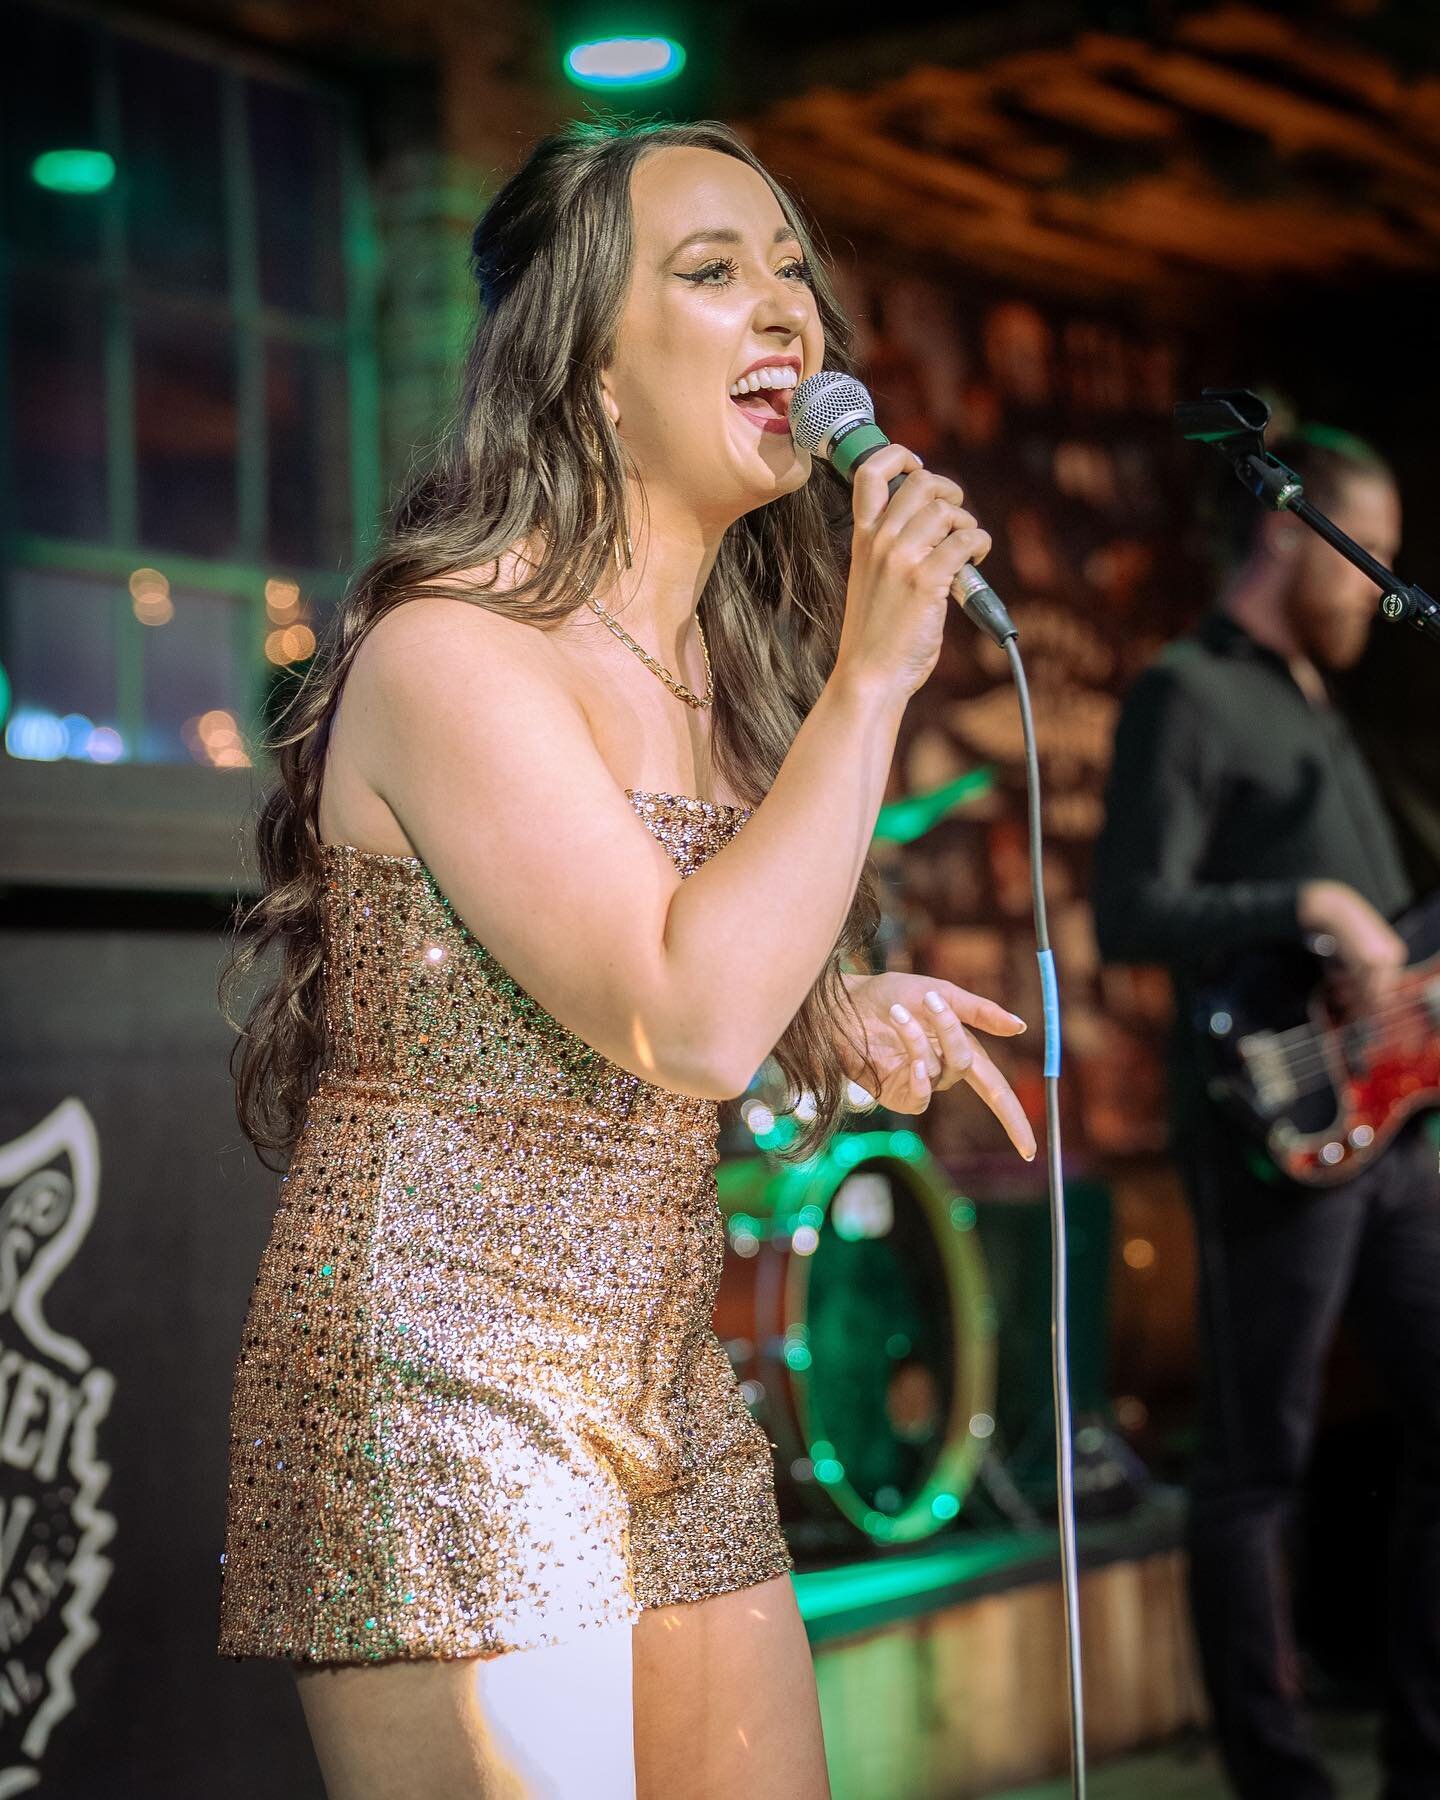 WHISKEY JAM ✨✨✨✨

sparkles were worn, @daddysdogsnash were eaten, and so much fun was had 🫶🏼

huge thank you to @wardguenther @whiskeyjam for having me, everyone that came out to the show, and to my amazing band @timmymillerengineer @marshiesplayst